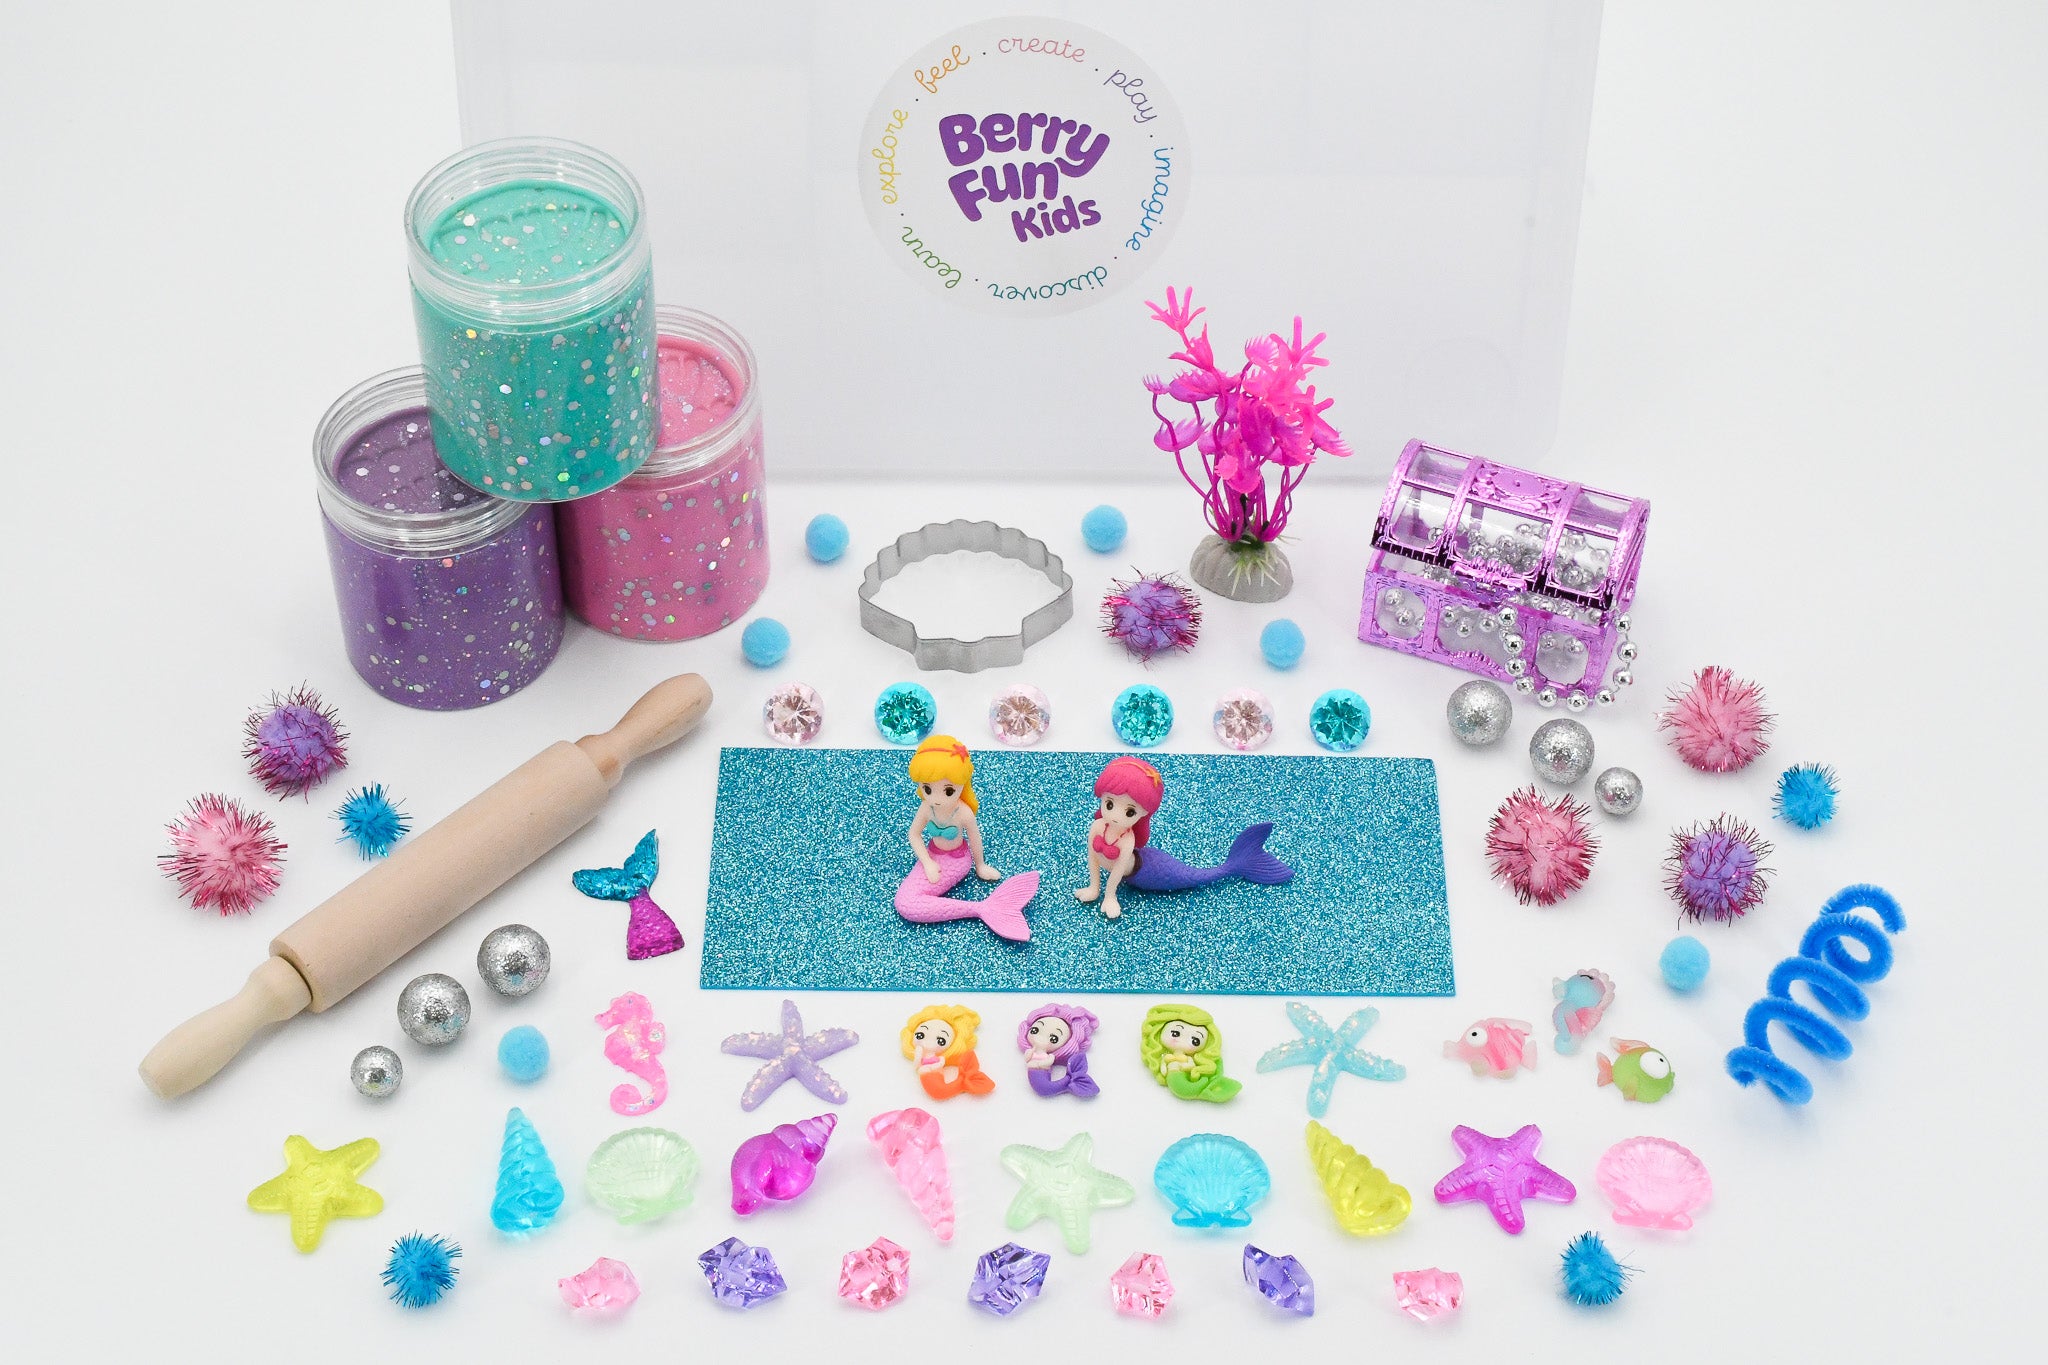  Craft-tastic – I Love Mermaids Kit – Craft Kit Includes 6  Mermaid-Themed Projects : Toys & Games